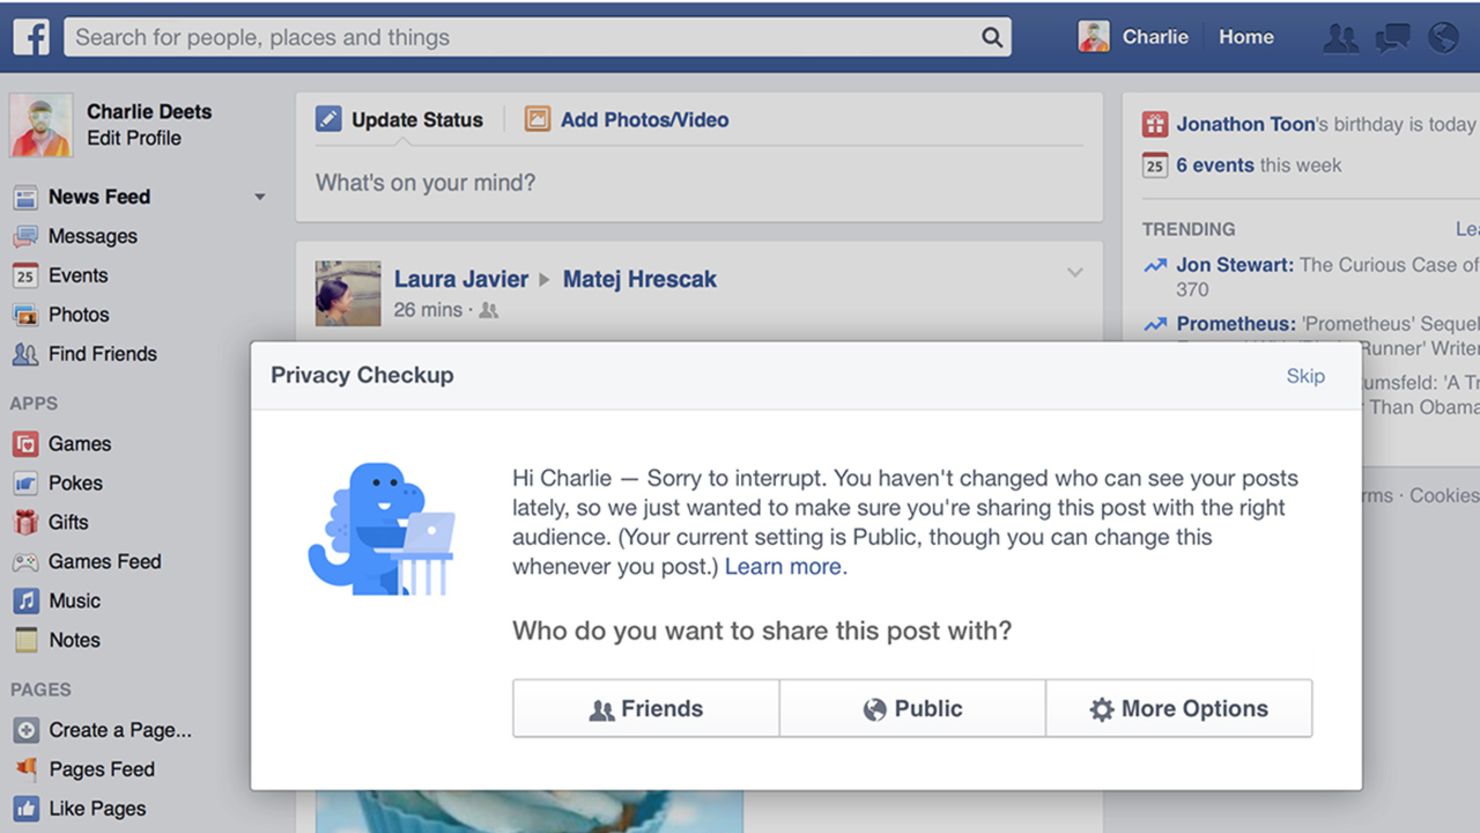 Facebook is introducing random "privacy checkups" for customers who haven't updated their settings in a long time.